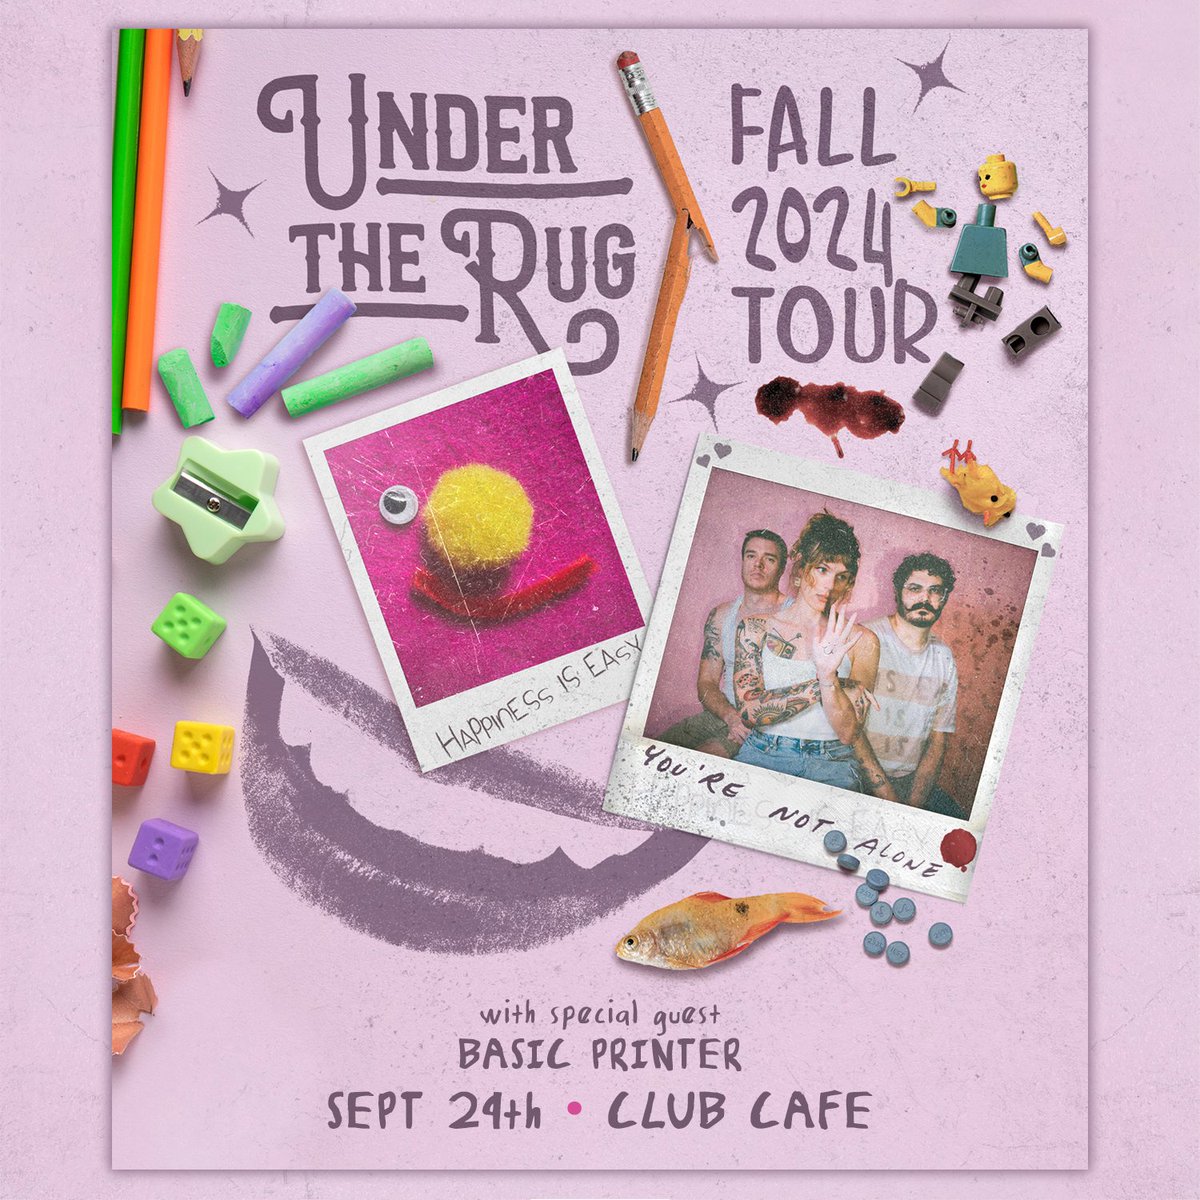 📣🗓 NEW SHOW 🗓📣

@ClubCafeLive | 09/29 | @undertherugmus with special guest #BasicPrinter! 

🎟 On Sale 05/15 via: hive.co/l/929underther…

#opusonepgh #pittsburgh #undertherug #basicprinter #clubcafe #clubcafelive #national #rock